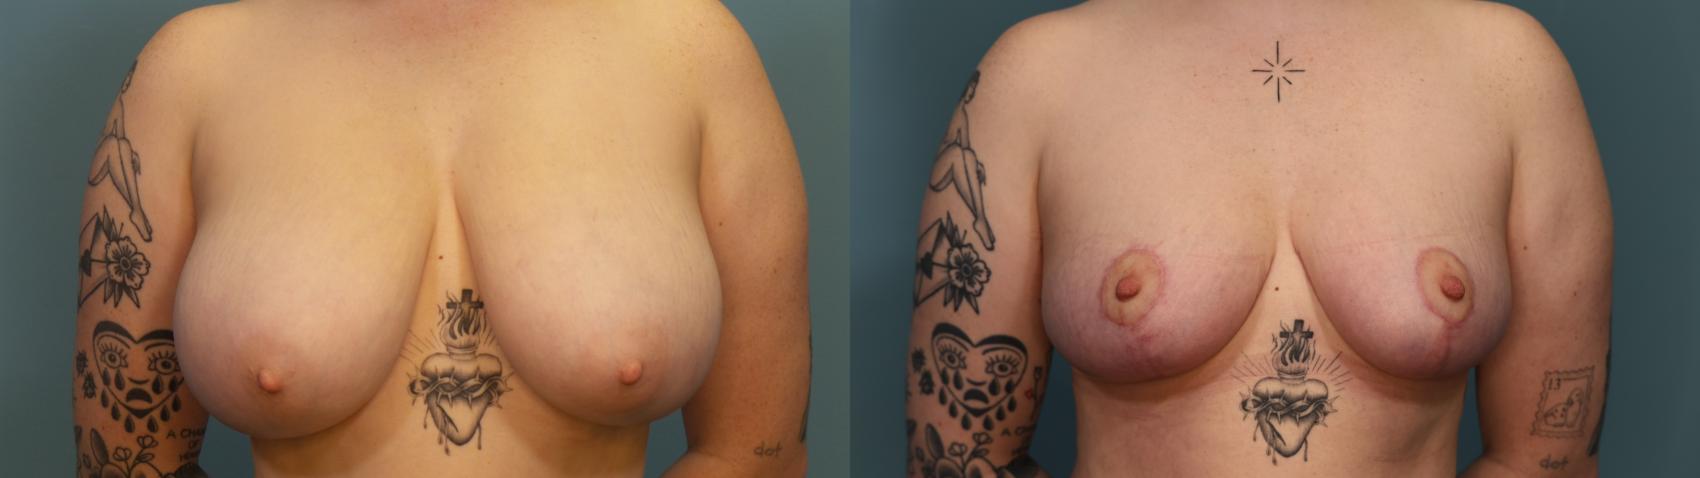 Breast reduction done by Dr. Kyle Baltrusch 